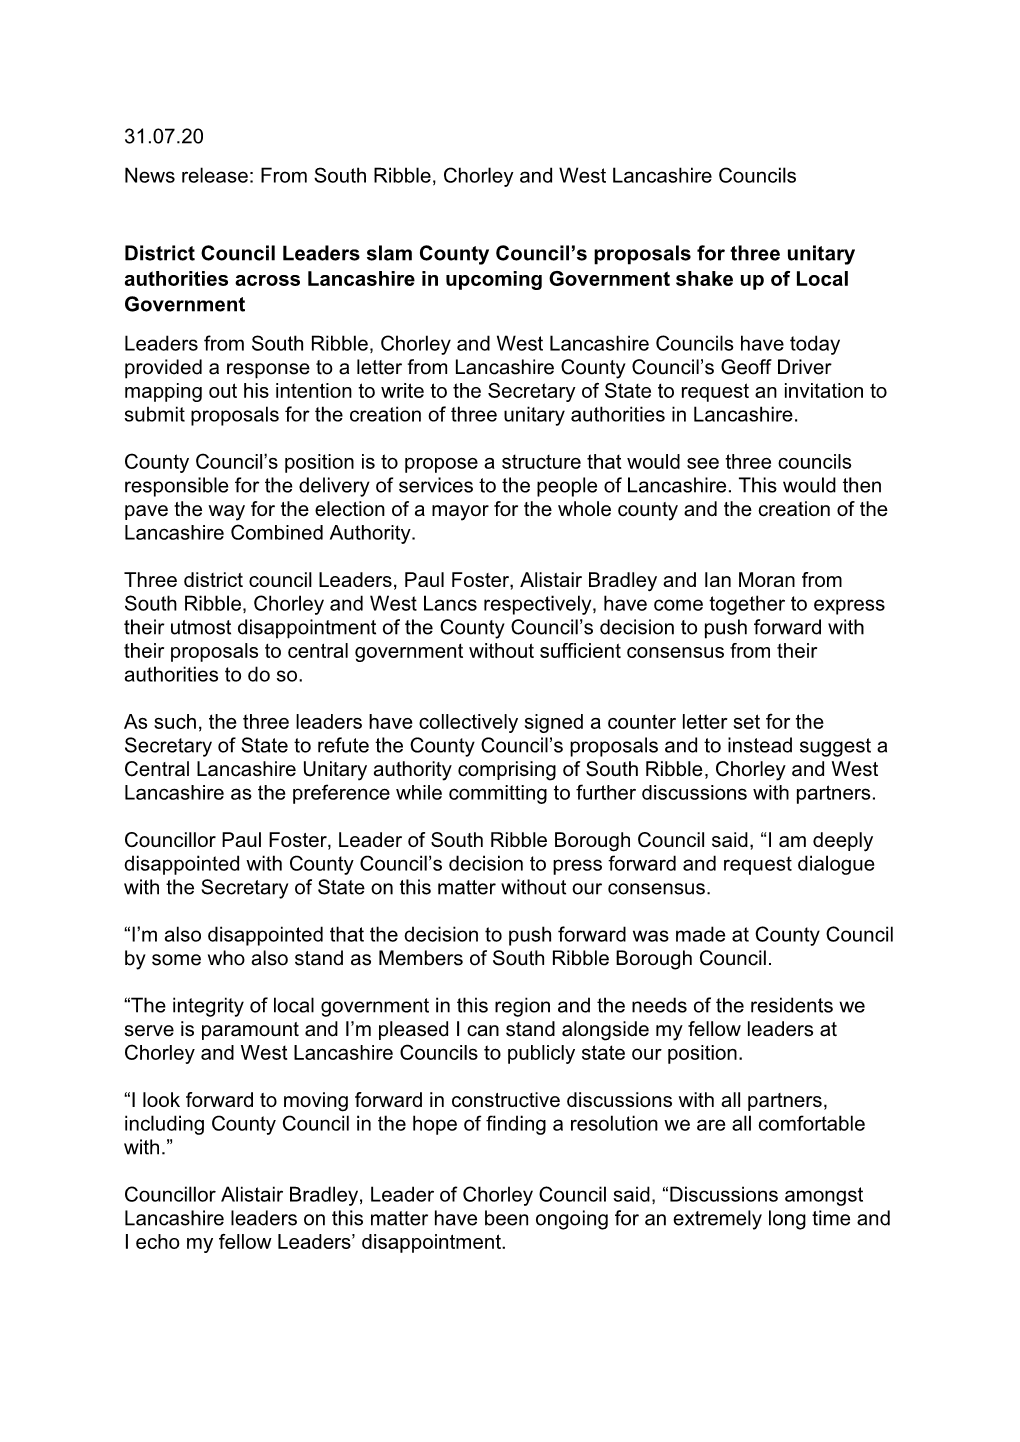 31.07.20 News Release: from South Ribble, Chorley and West Lancashire Councils District Council Leaders Slam County Council's